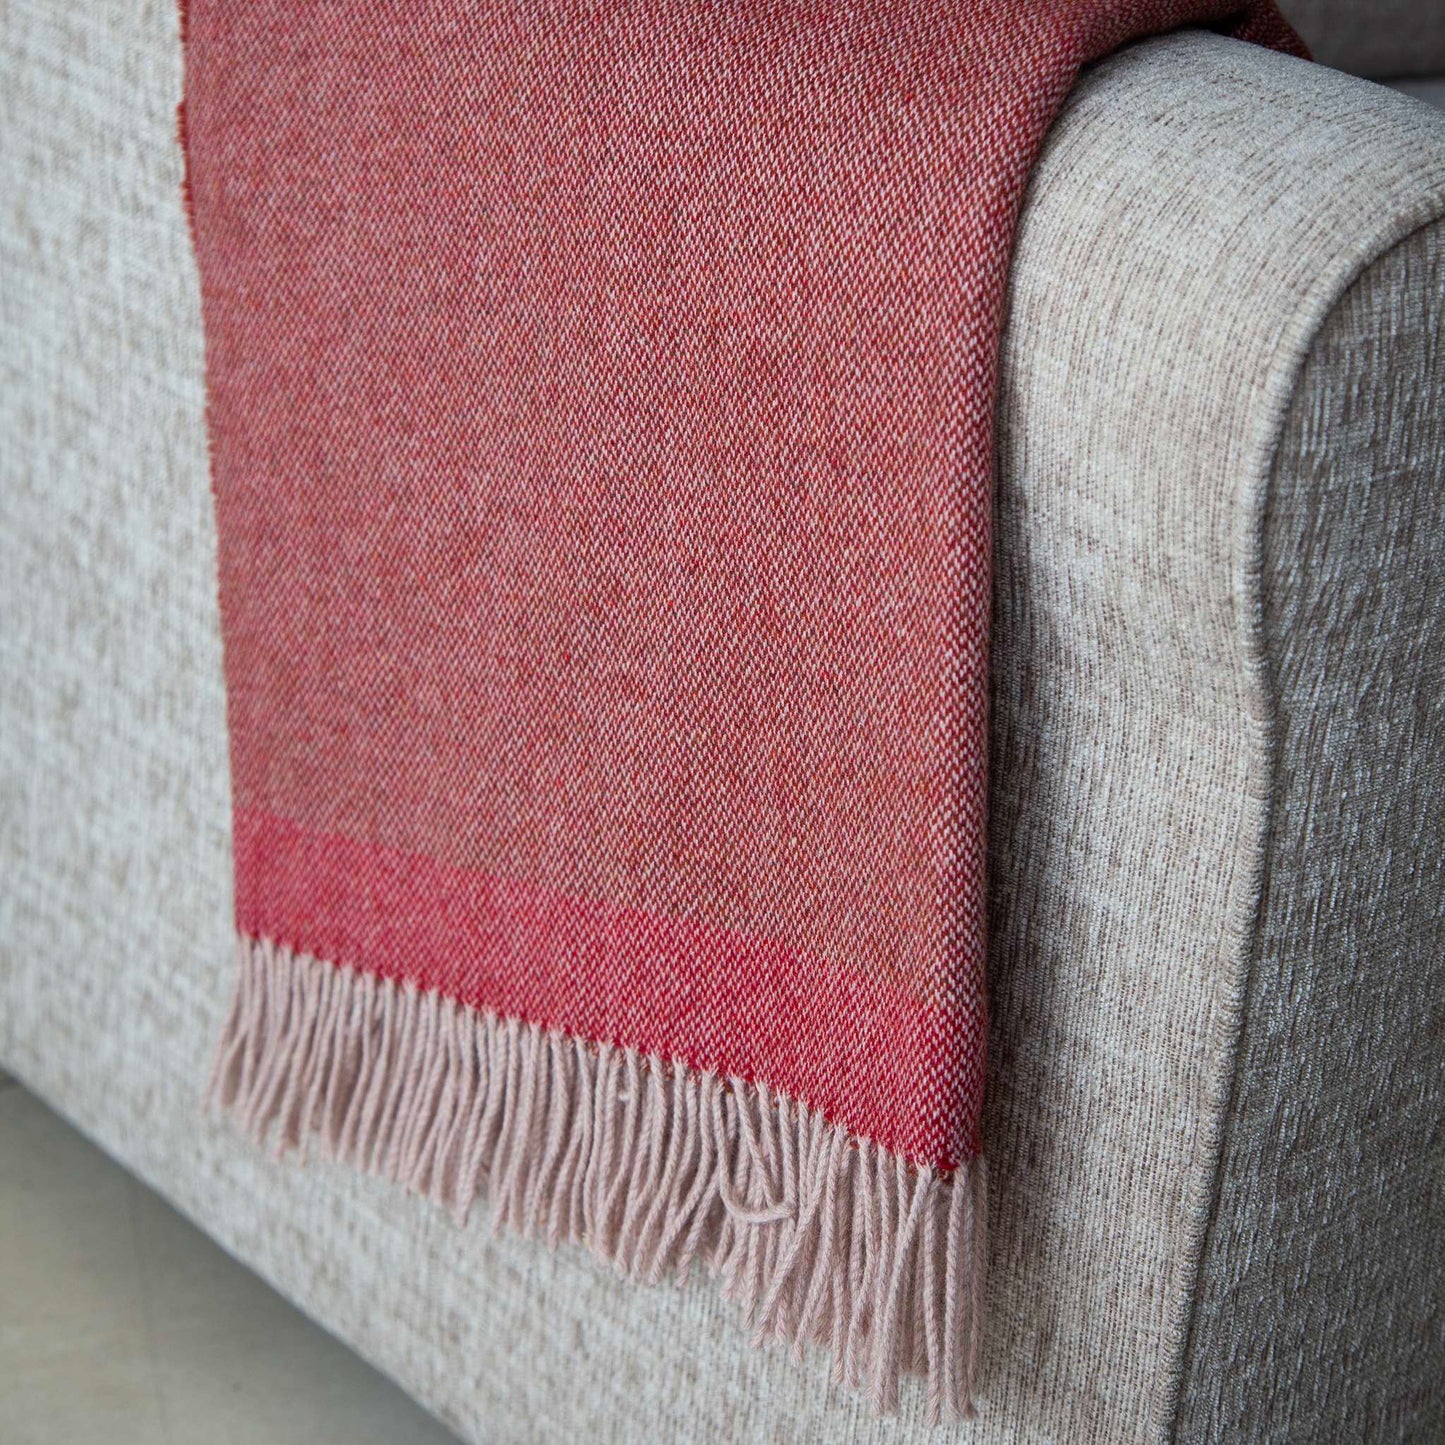 McNutt Blanket Recycled Wool Throw - Fire - McNutts of Donegal